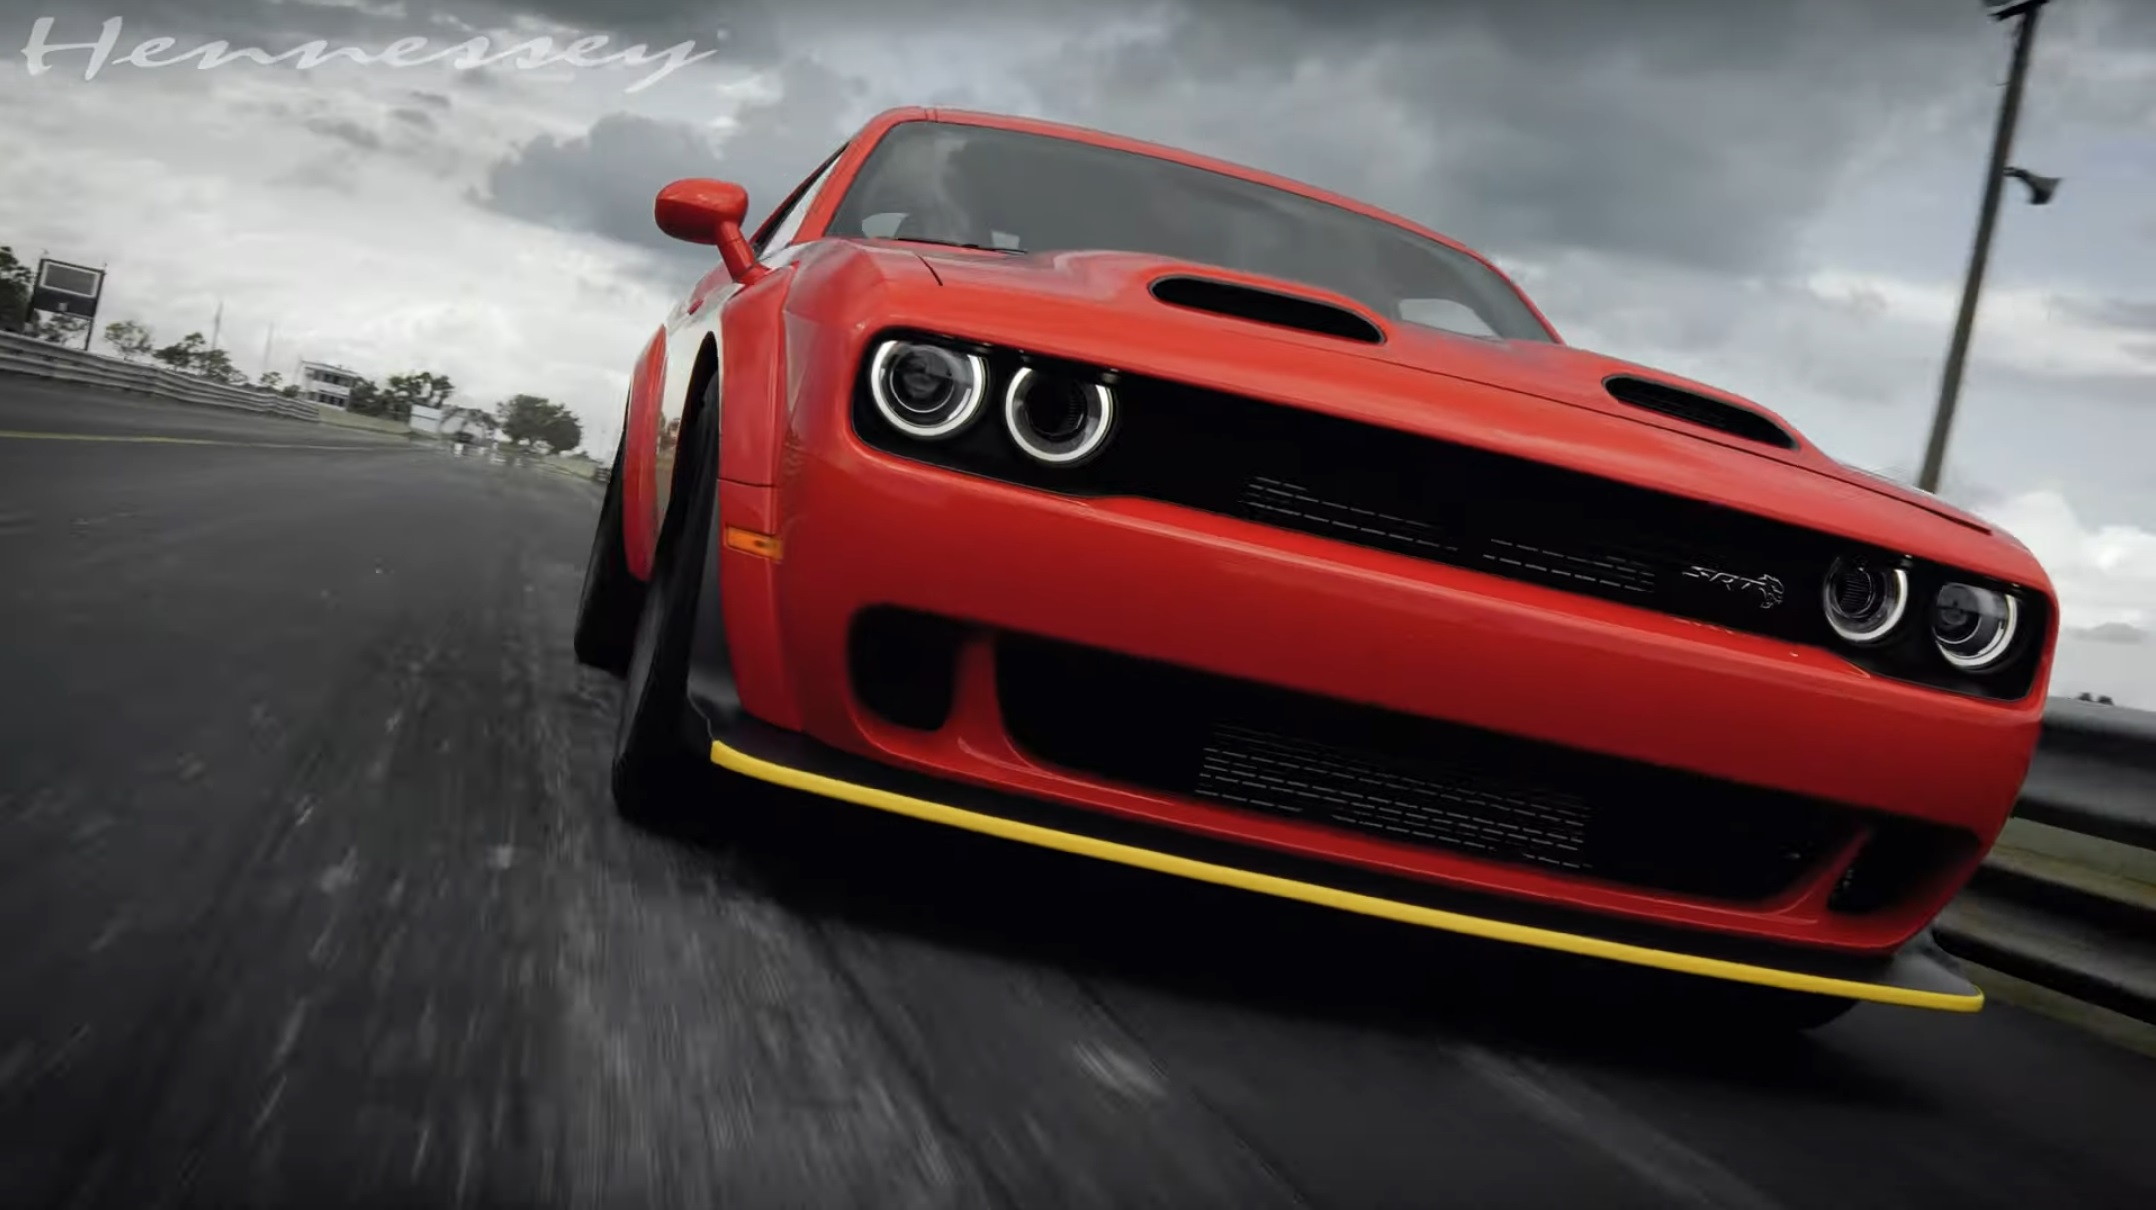 Evakuering Rund velfærd Hennessey's 1,035 HP Dodge Challenger Redeye Is a Whining, Blue-Collar  Monster - autoevolution